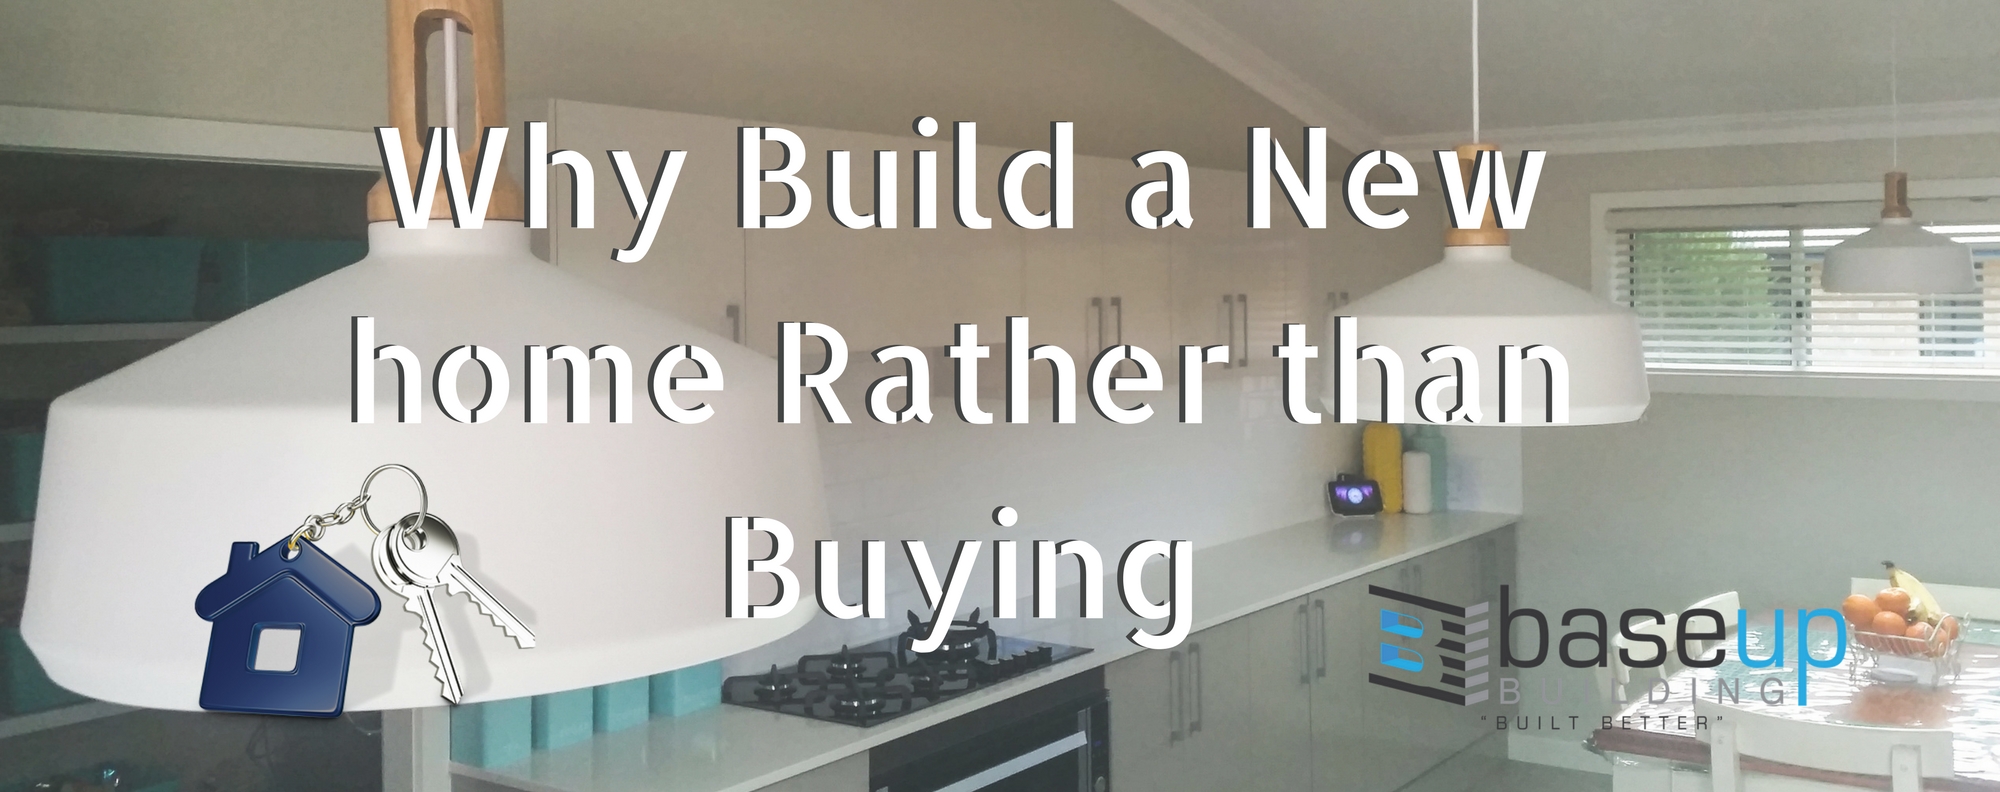 Why Build Rather Than Buy